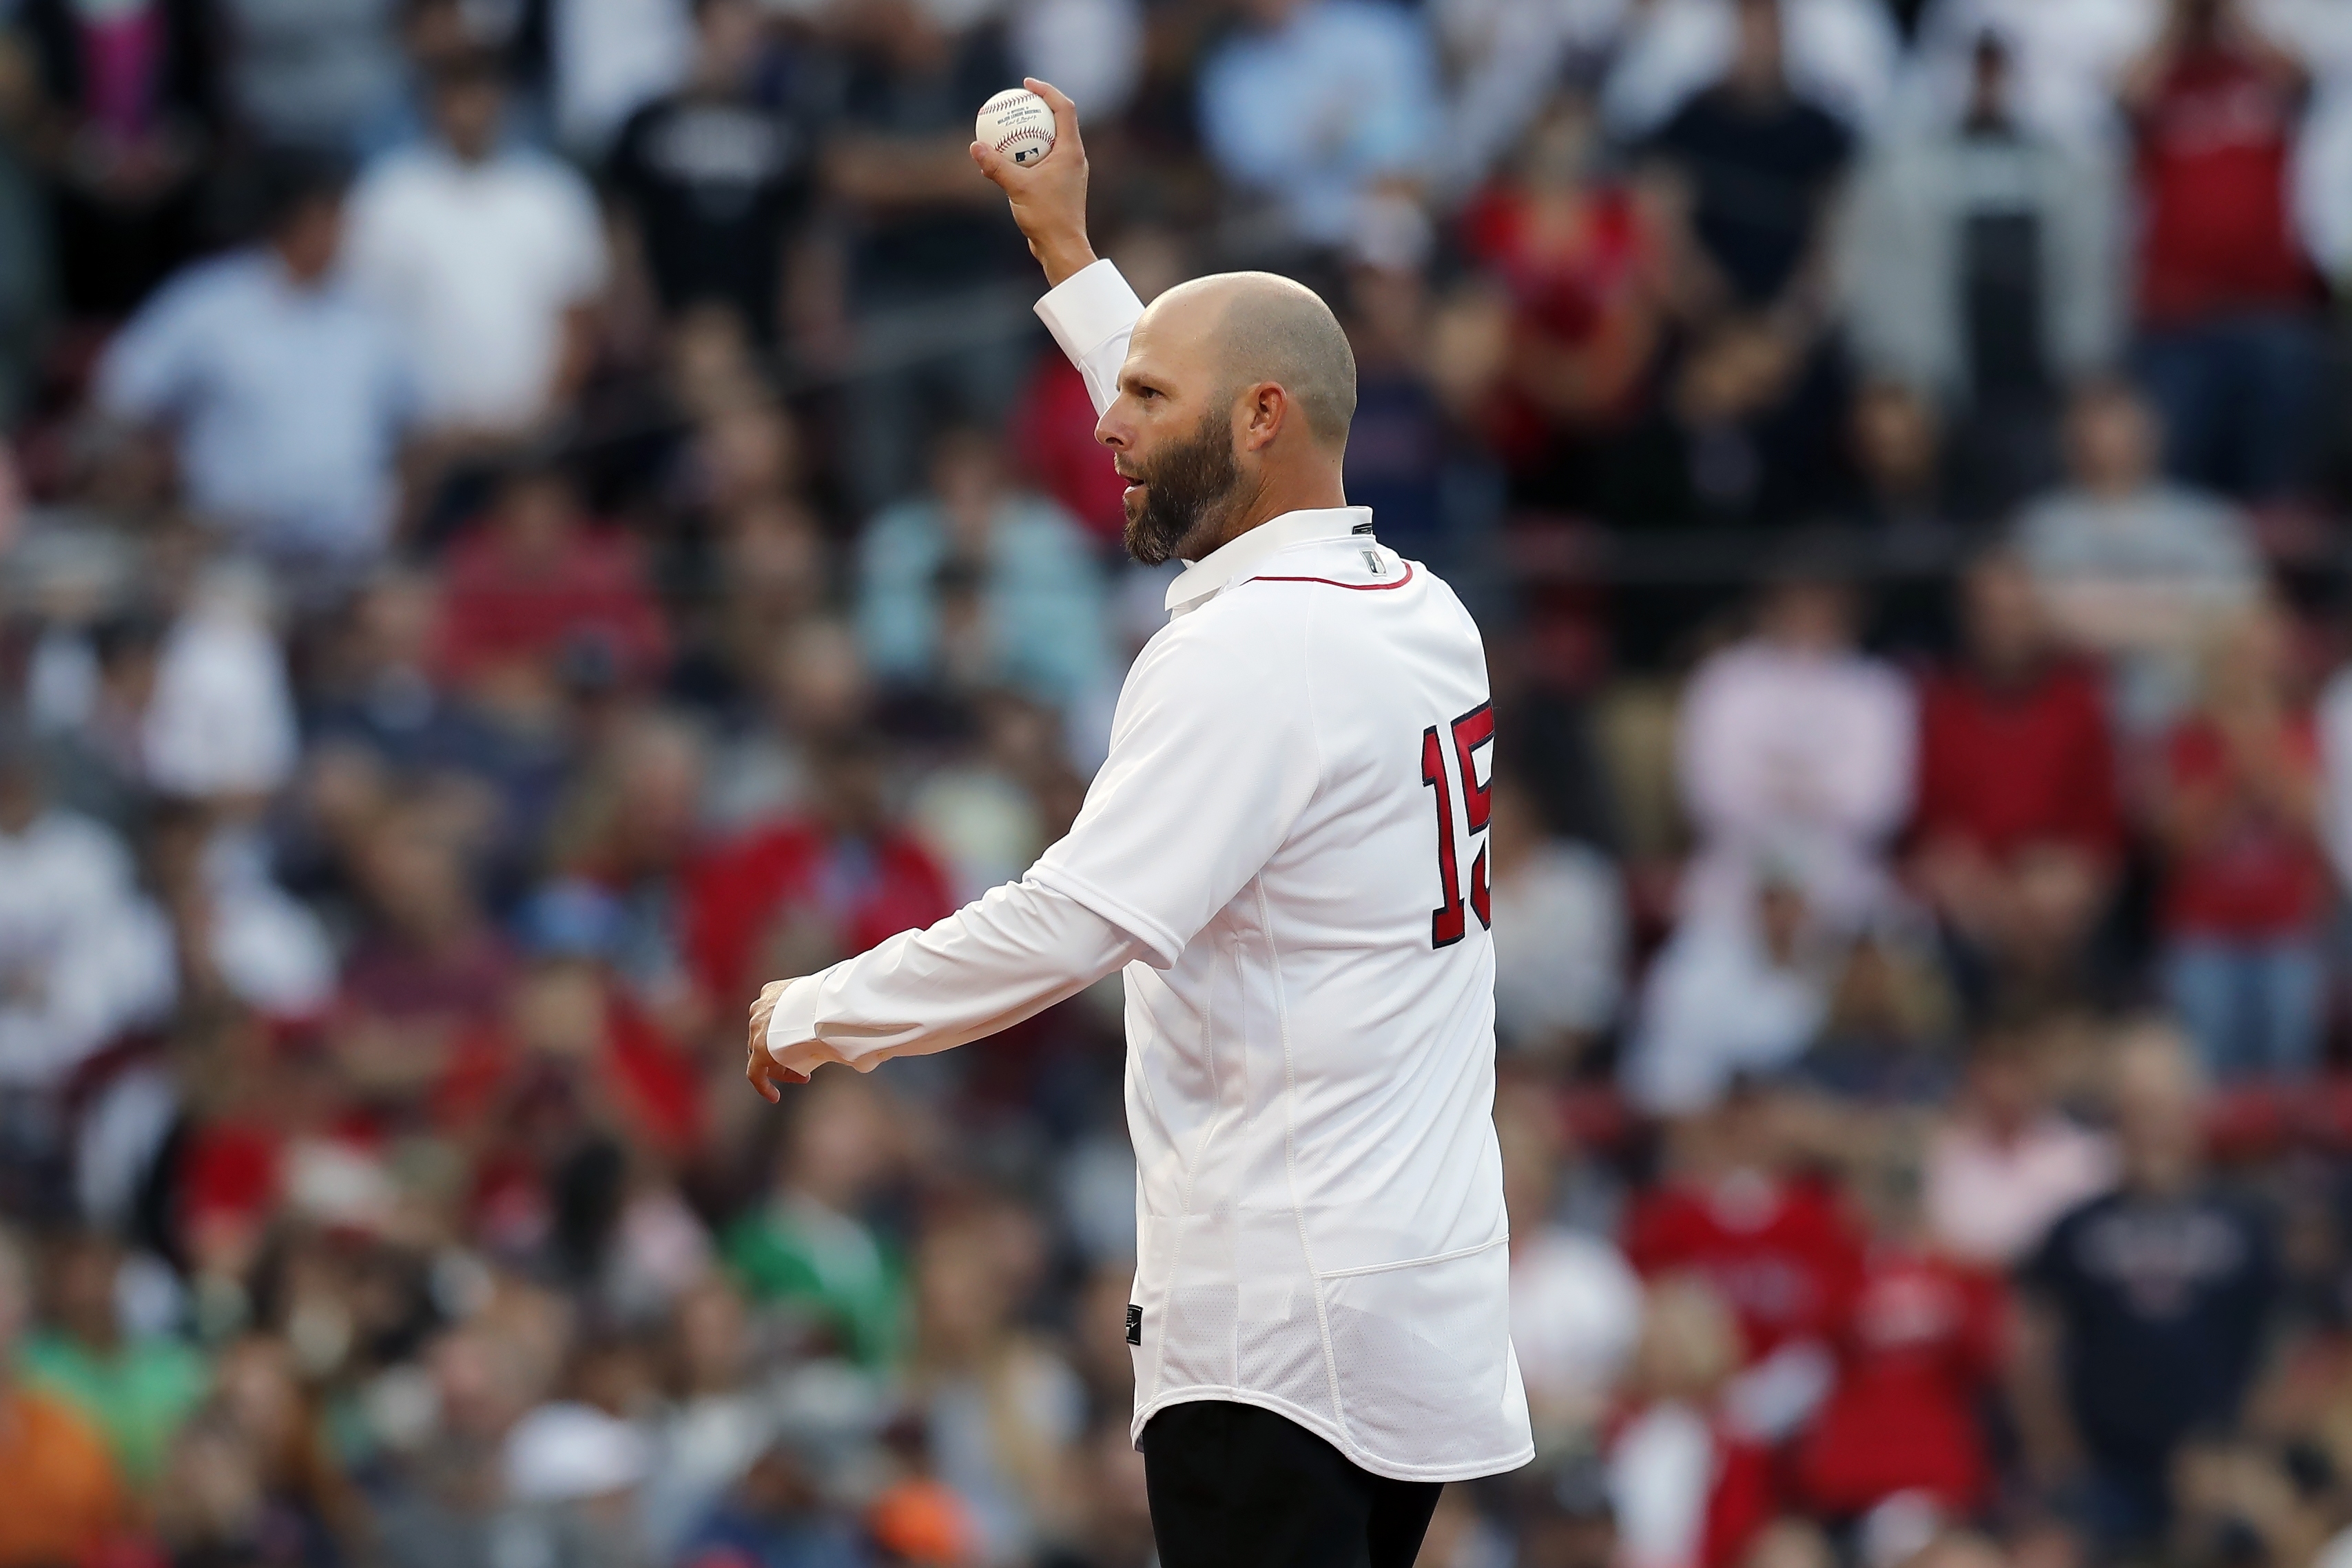 D-backs bring in Red Sox legend Dustin Pedroia to rally team